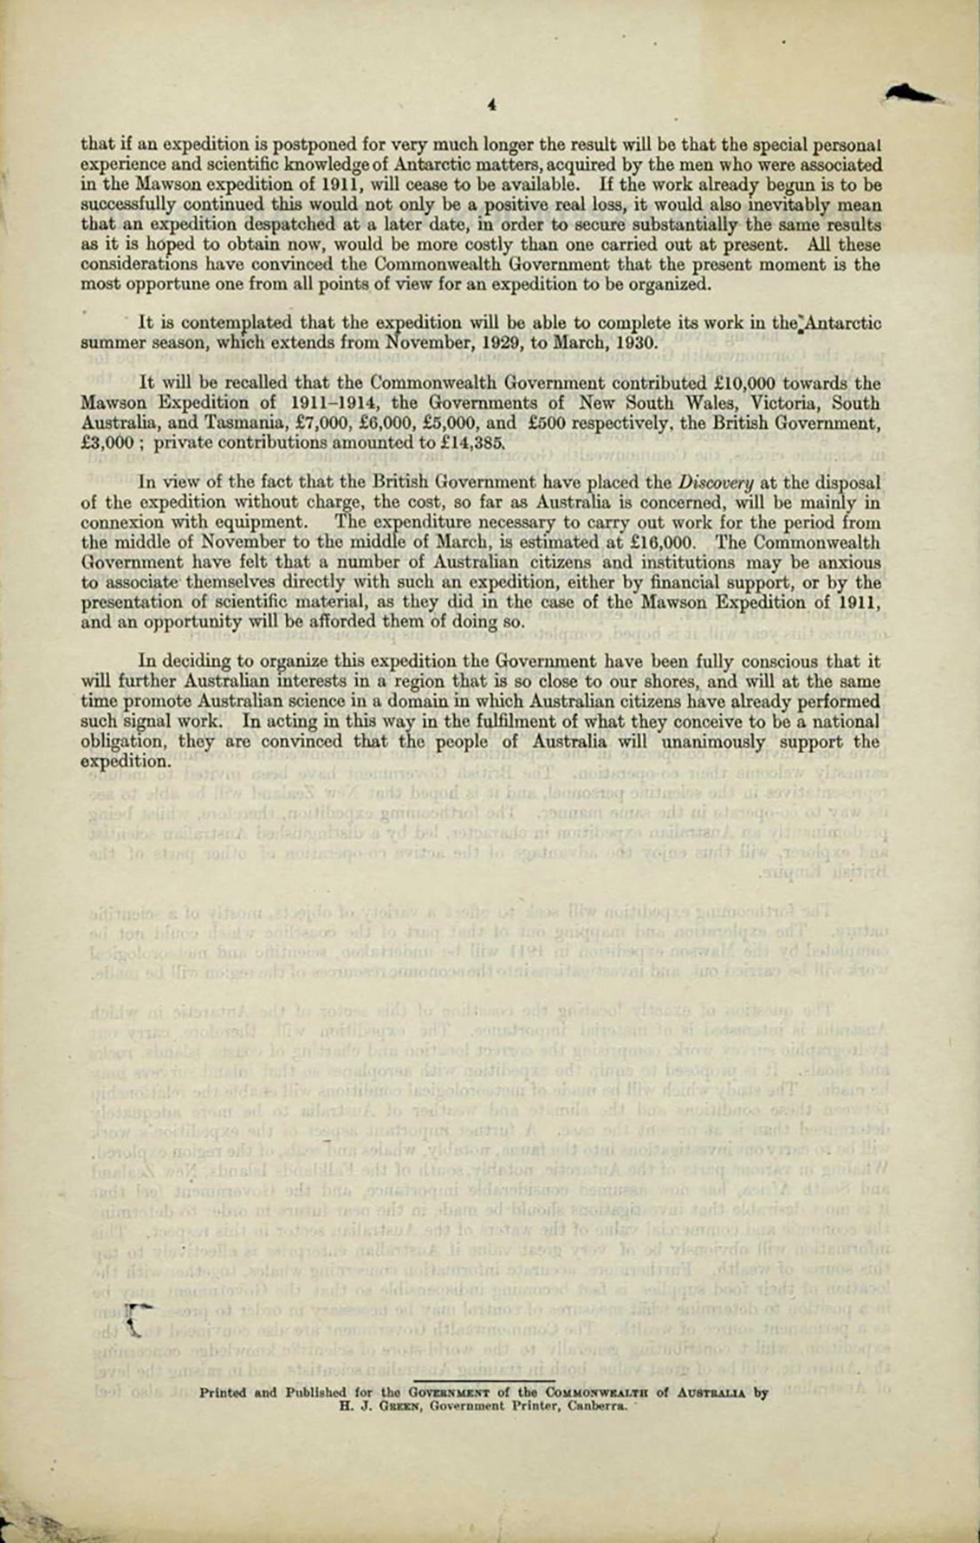 Statement made to the Australian Parliament by Prime Minister Stanley Melbourne Bruce on a proposed Australian expedition to the Antarctic.